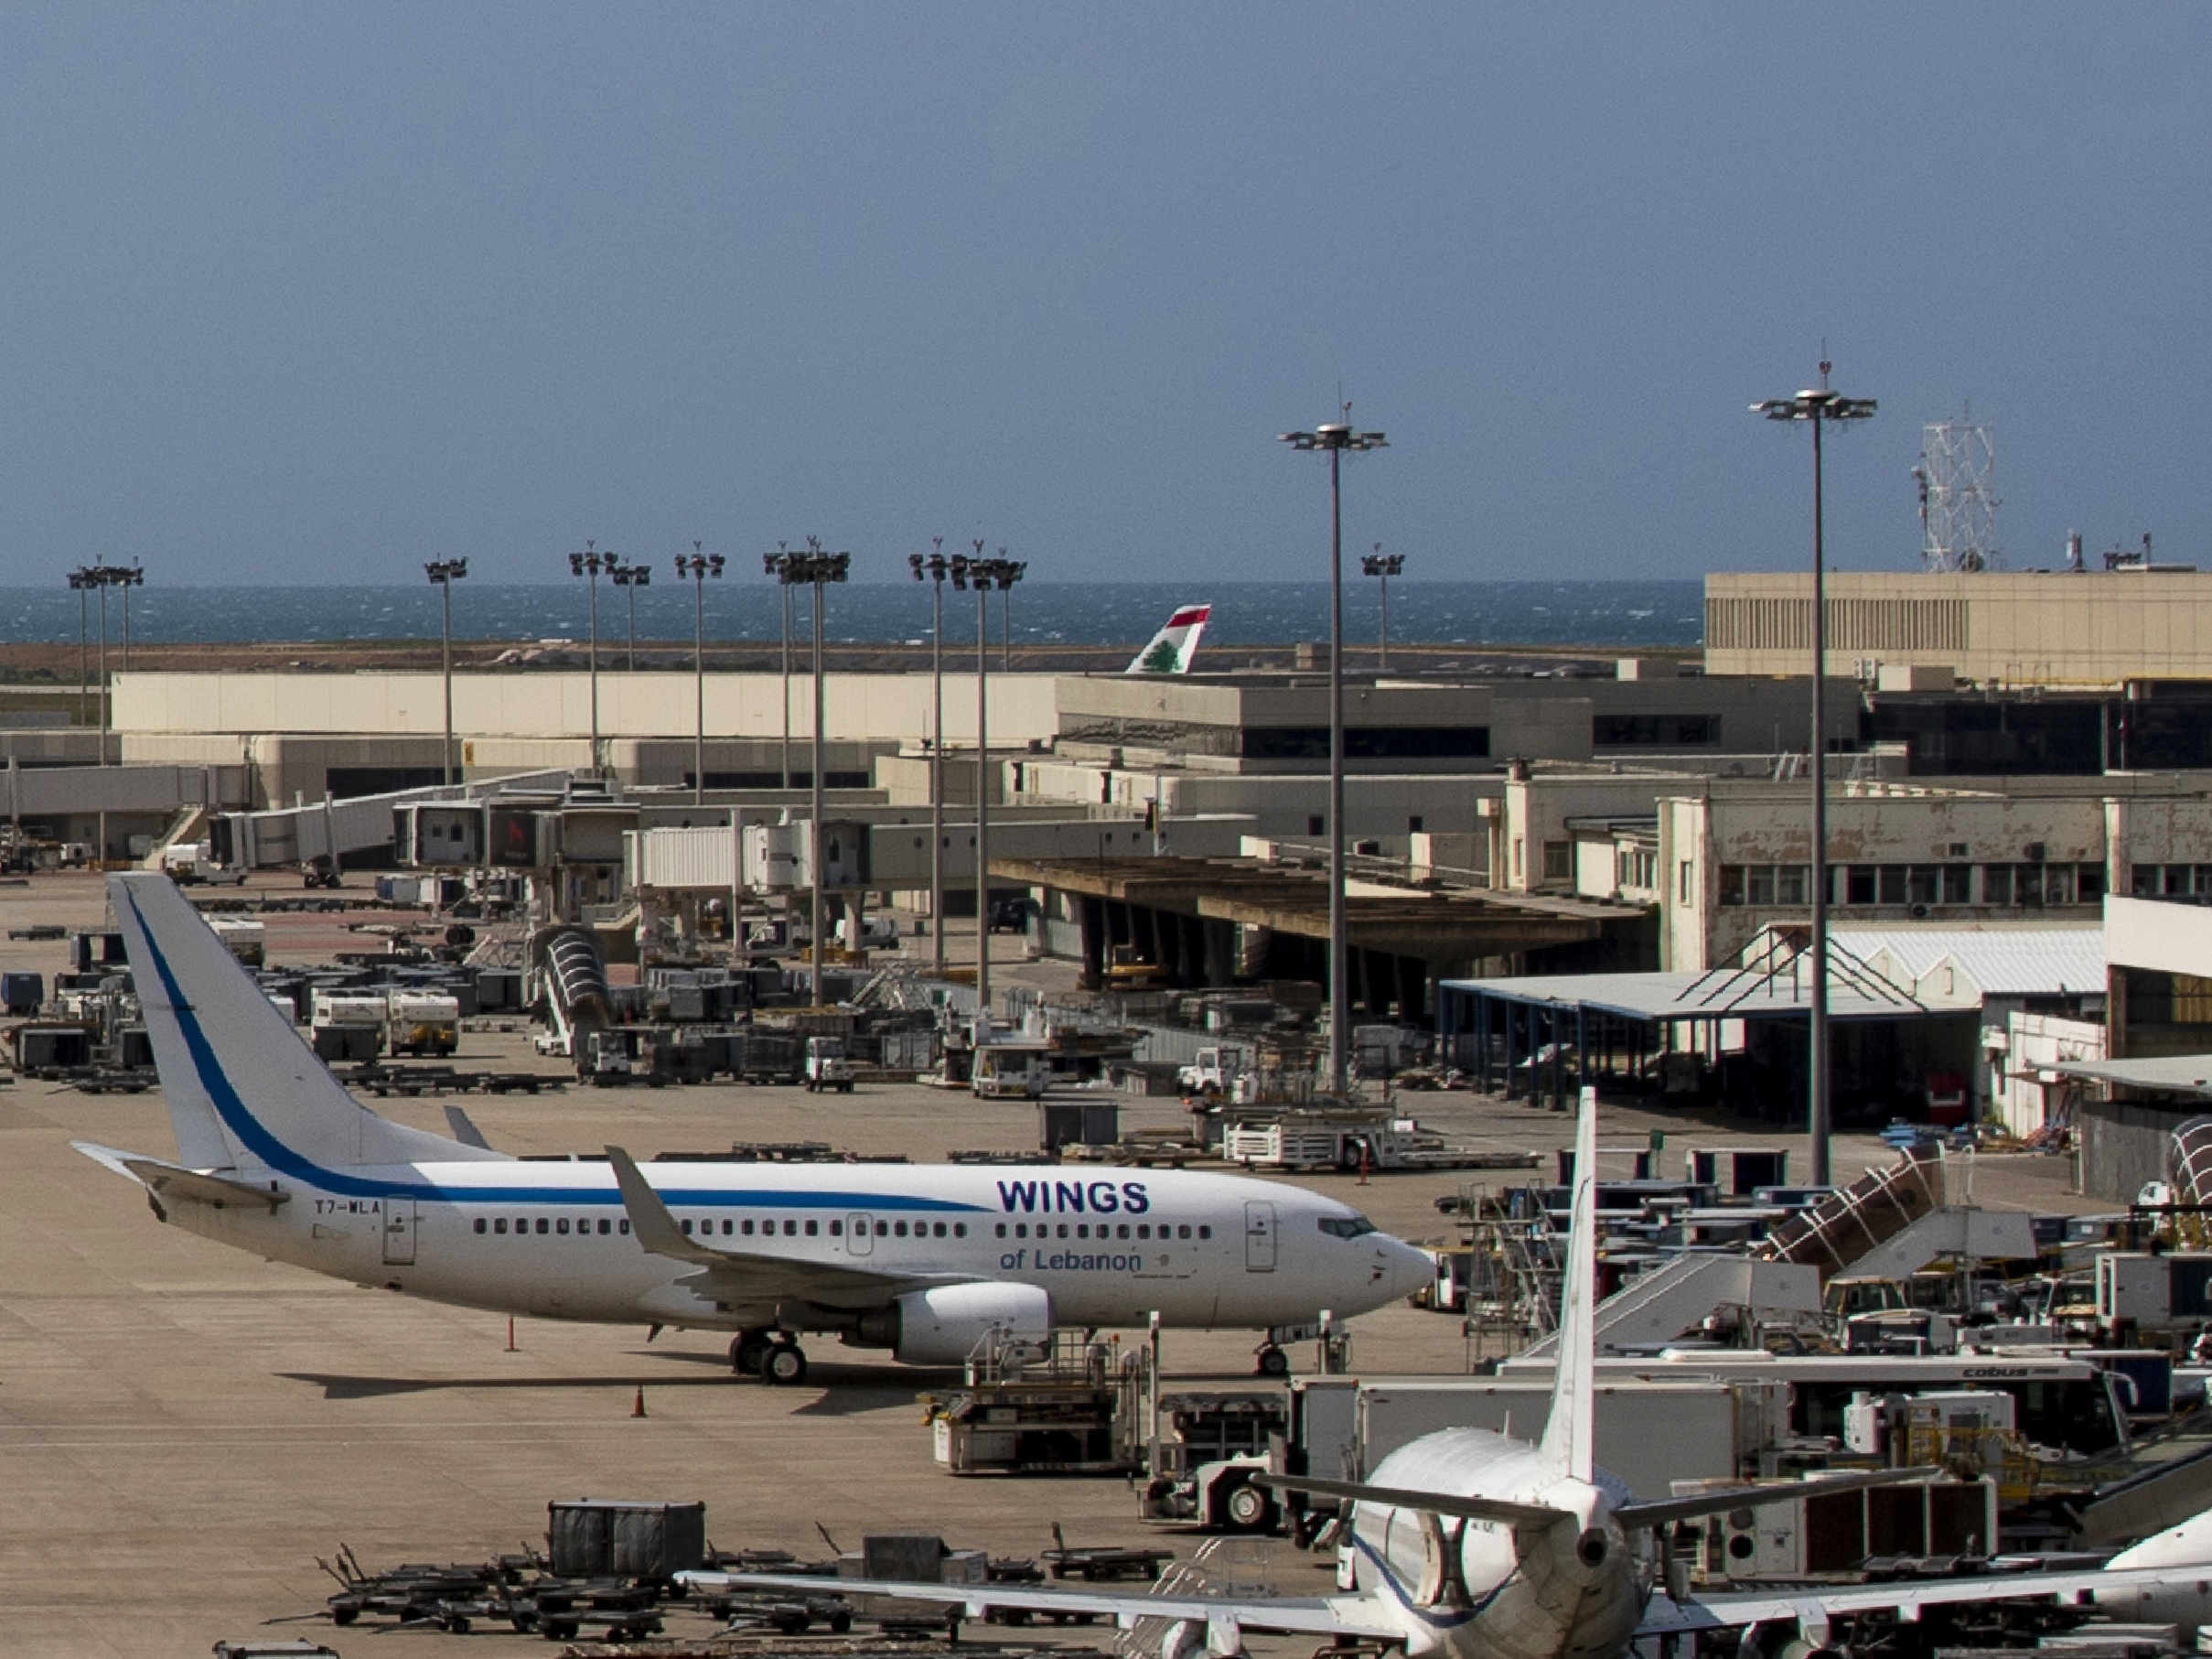 The U.S.-operated GPS has falsely located planes, people and ships, sometimes placing them at the  Beirut's international airport.